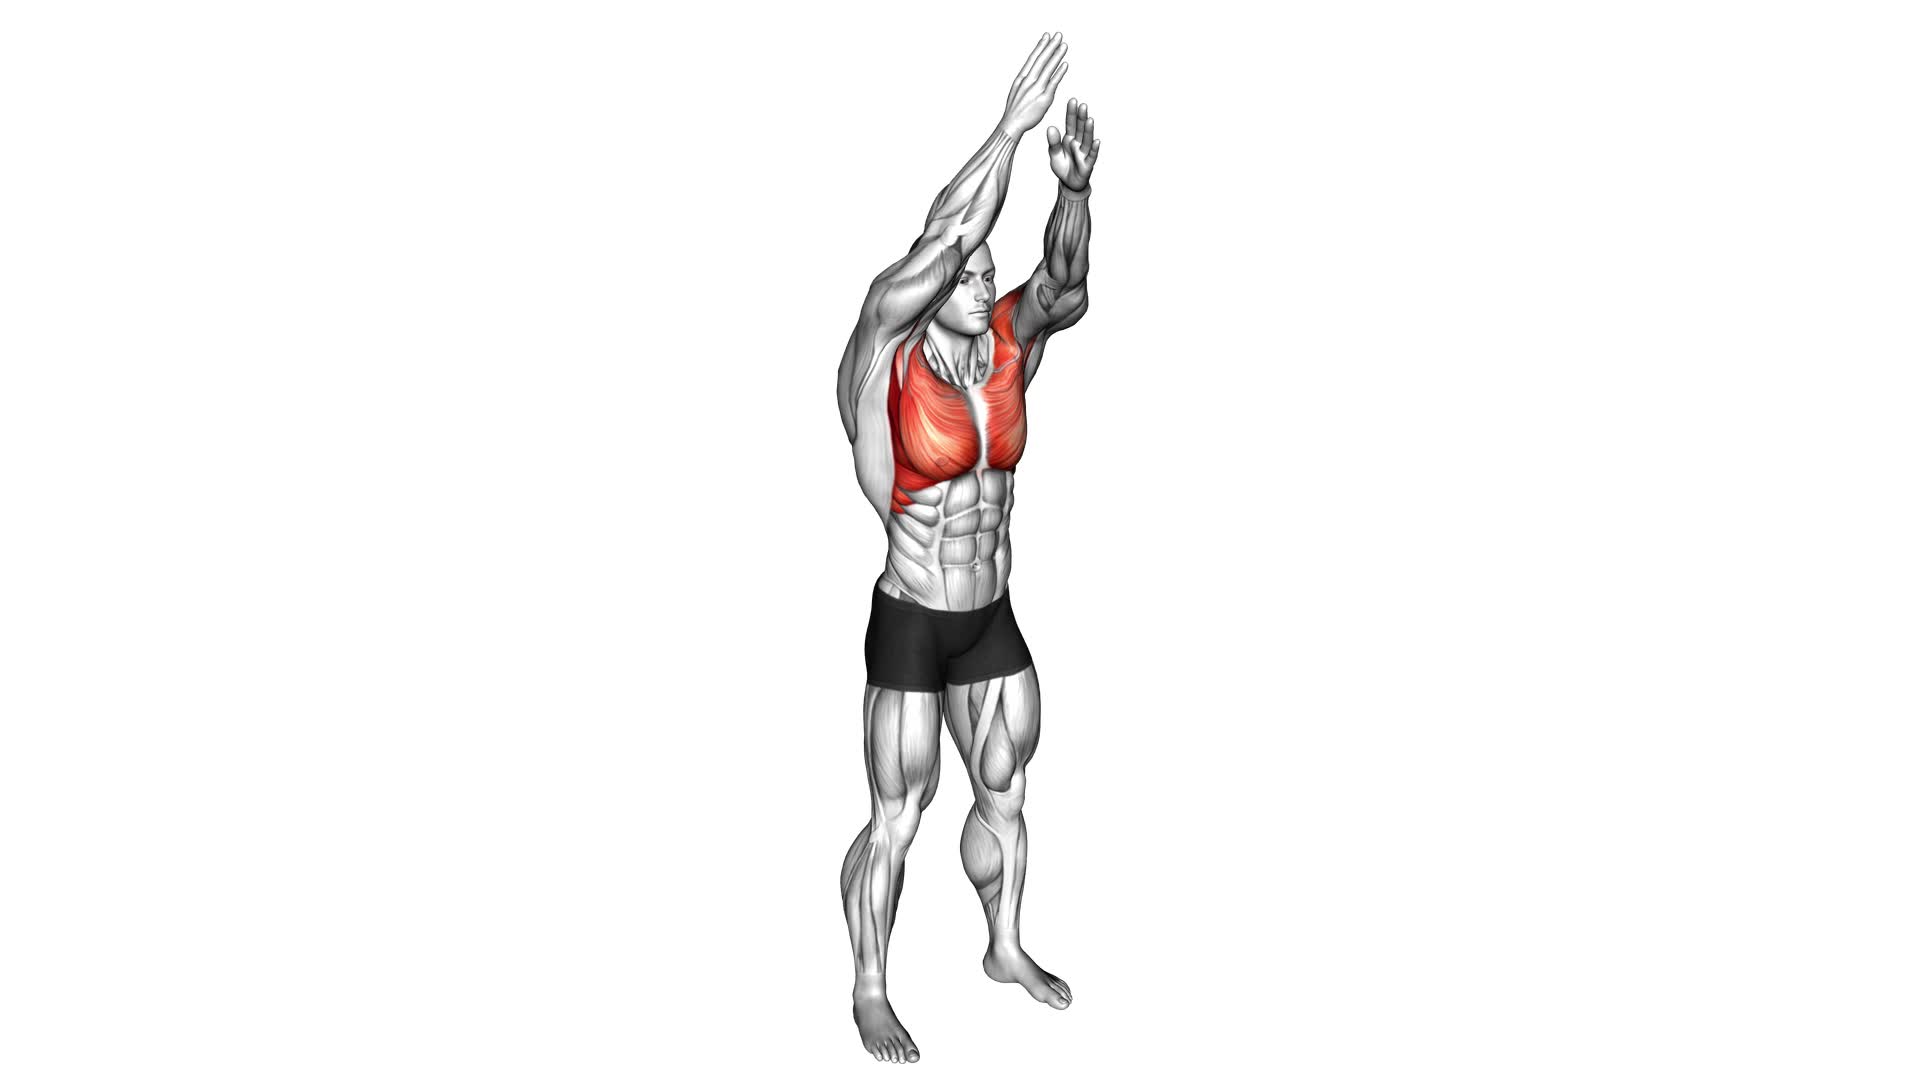 Criss Cross Arms Lift (male) - Video Exercise Guide & Tips